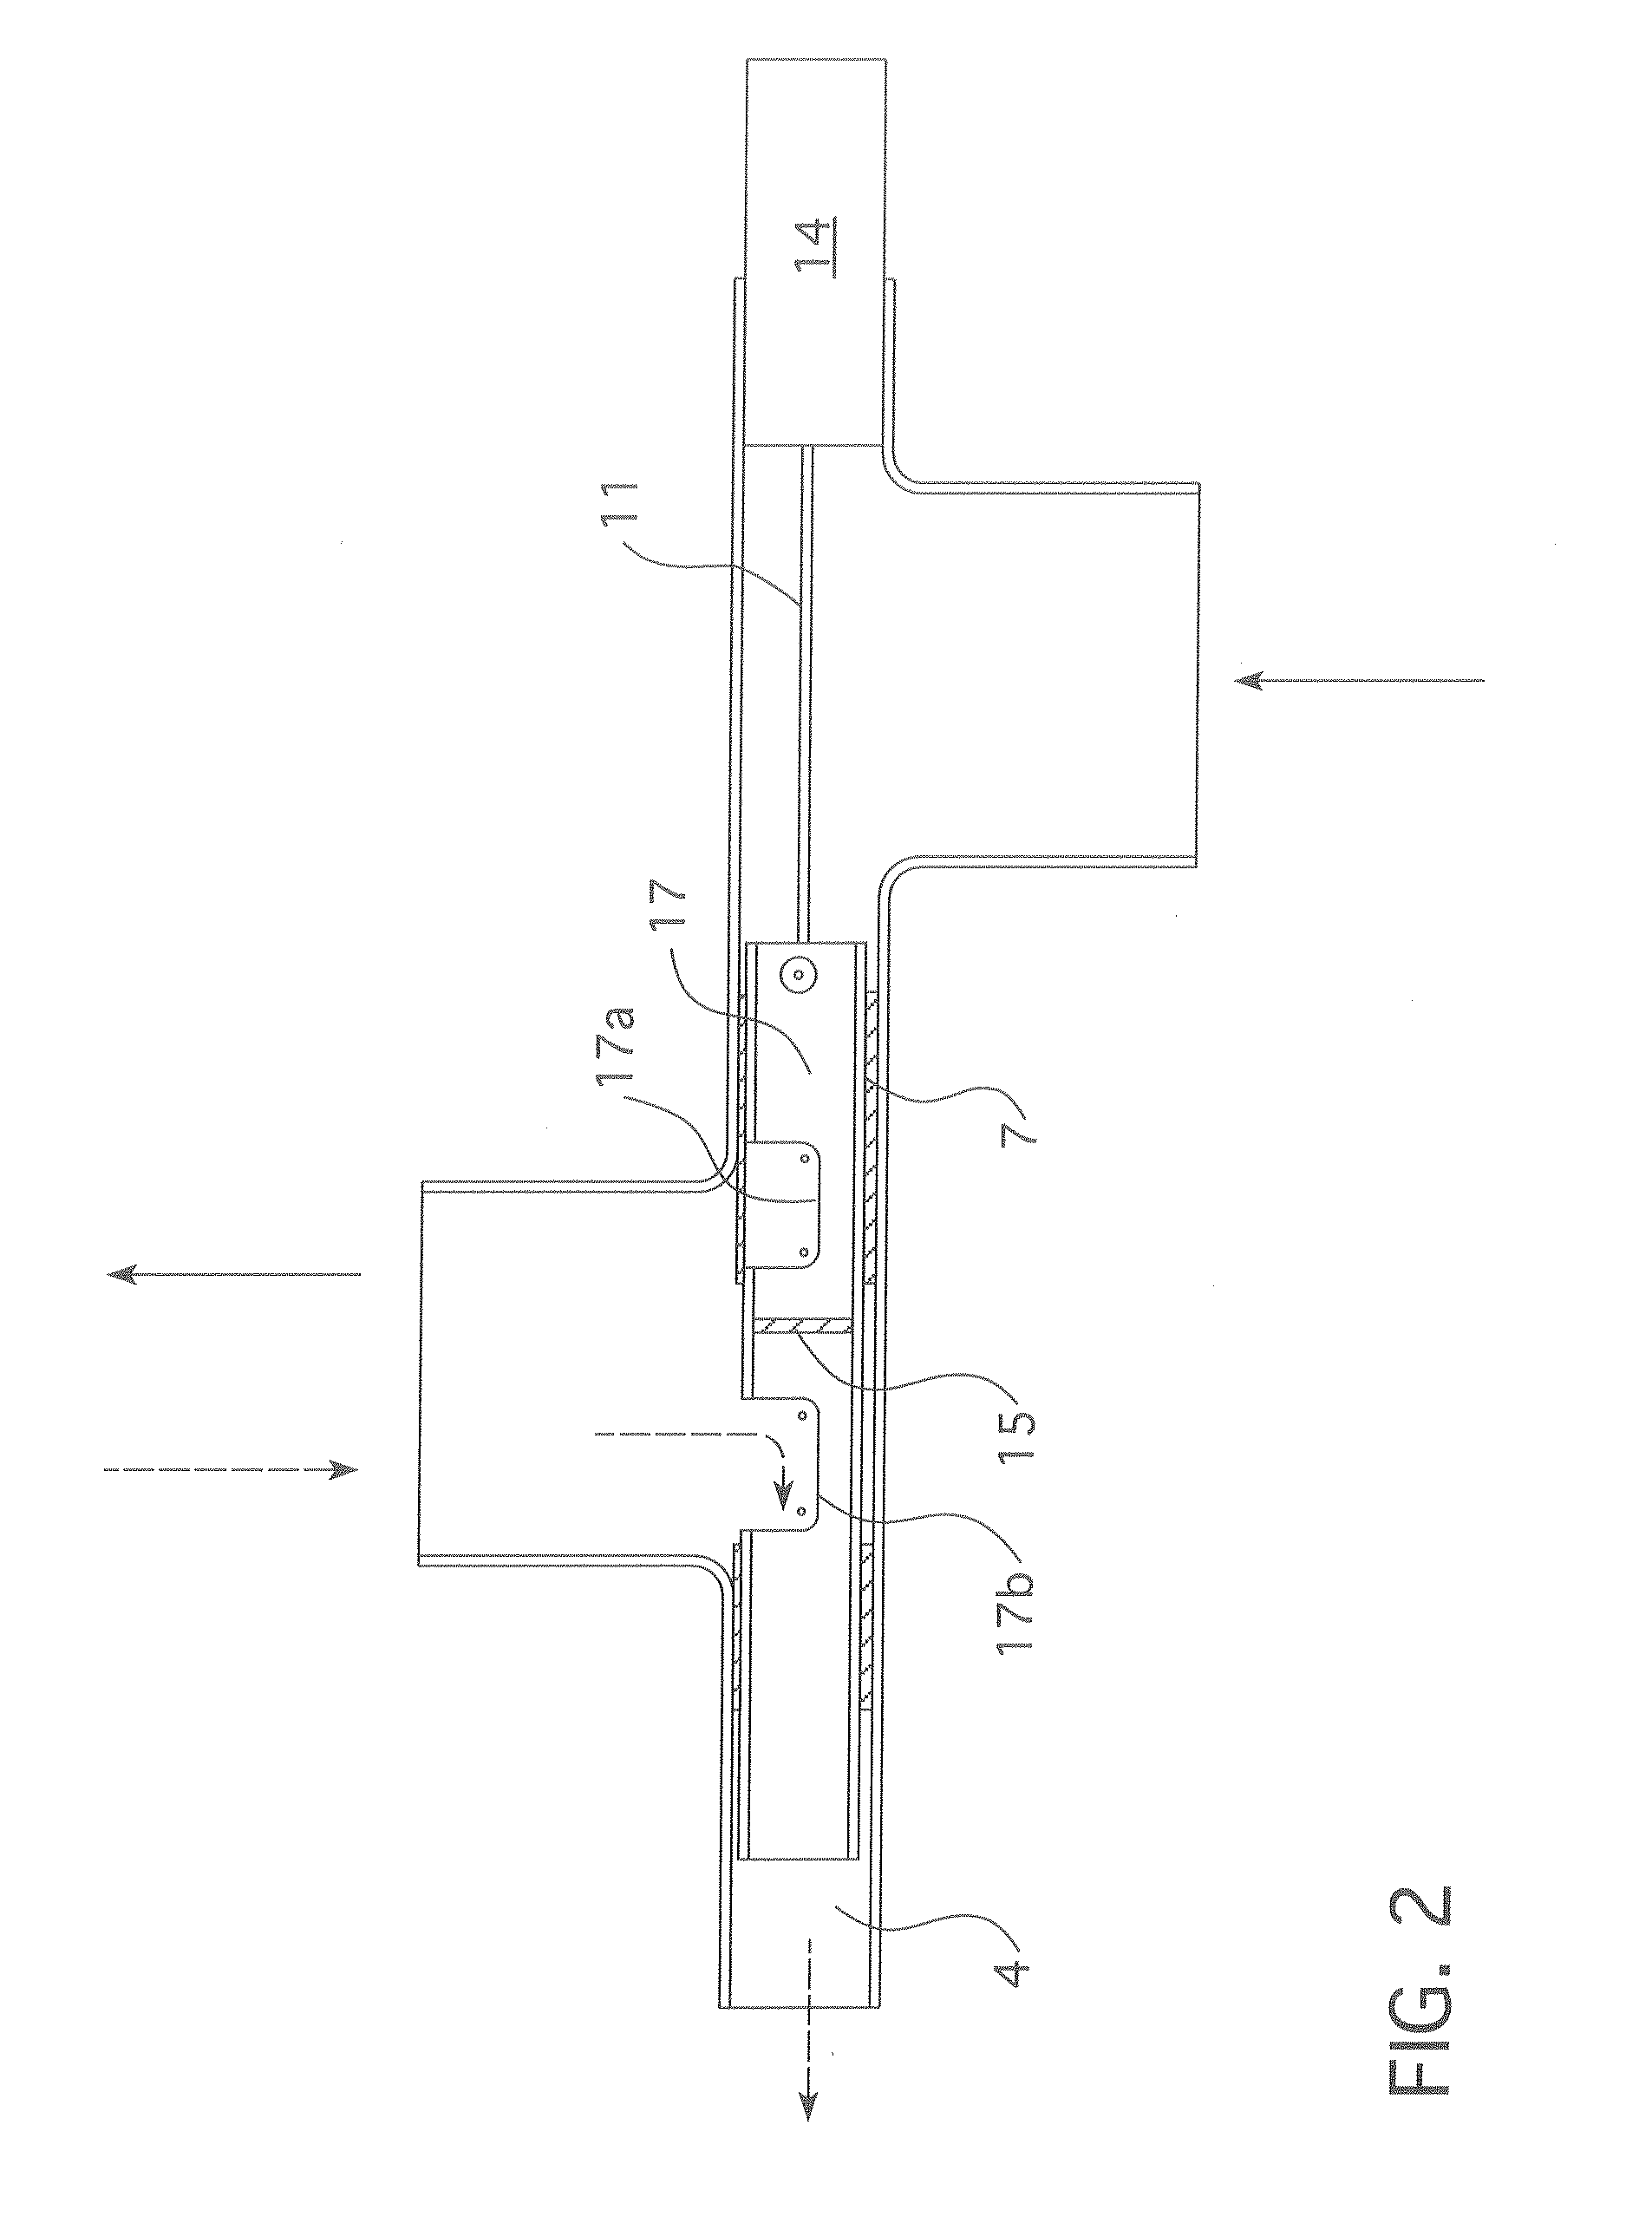 Apparatus and method for maintaining airway patency and pressure support ventilation